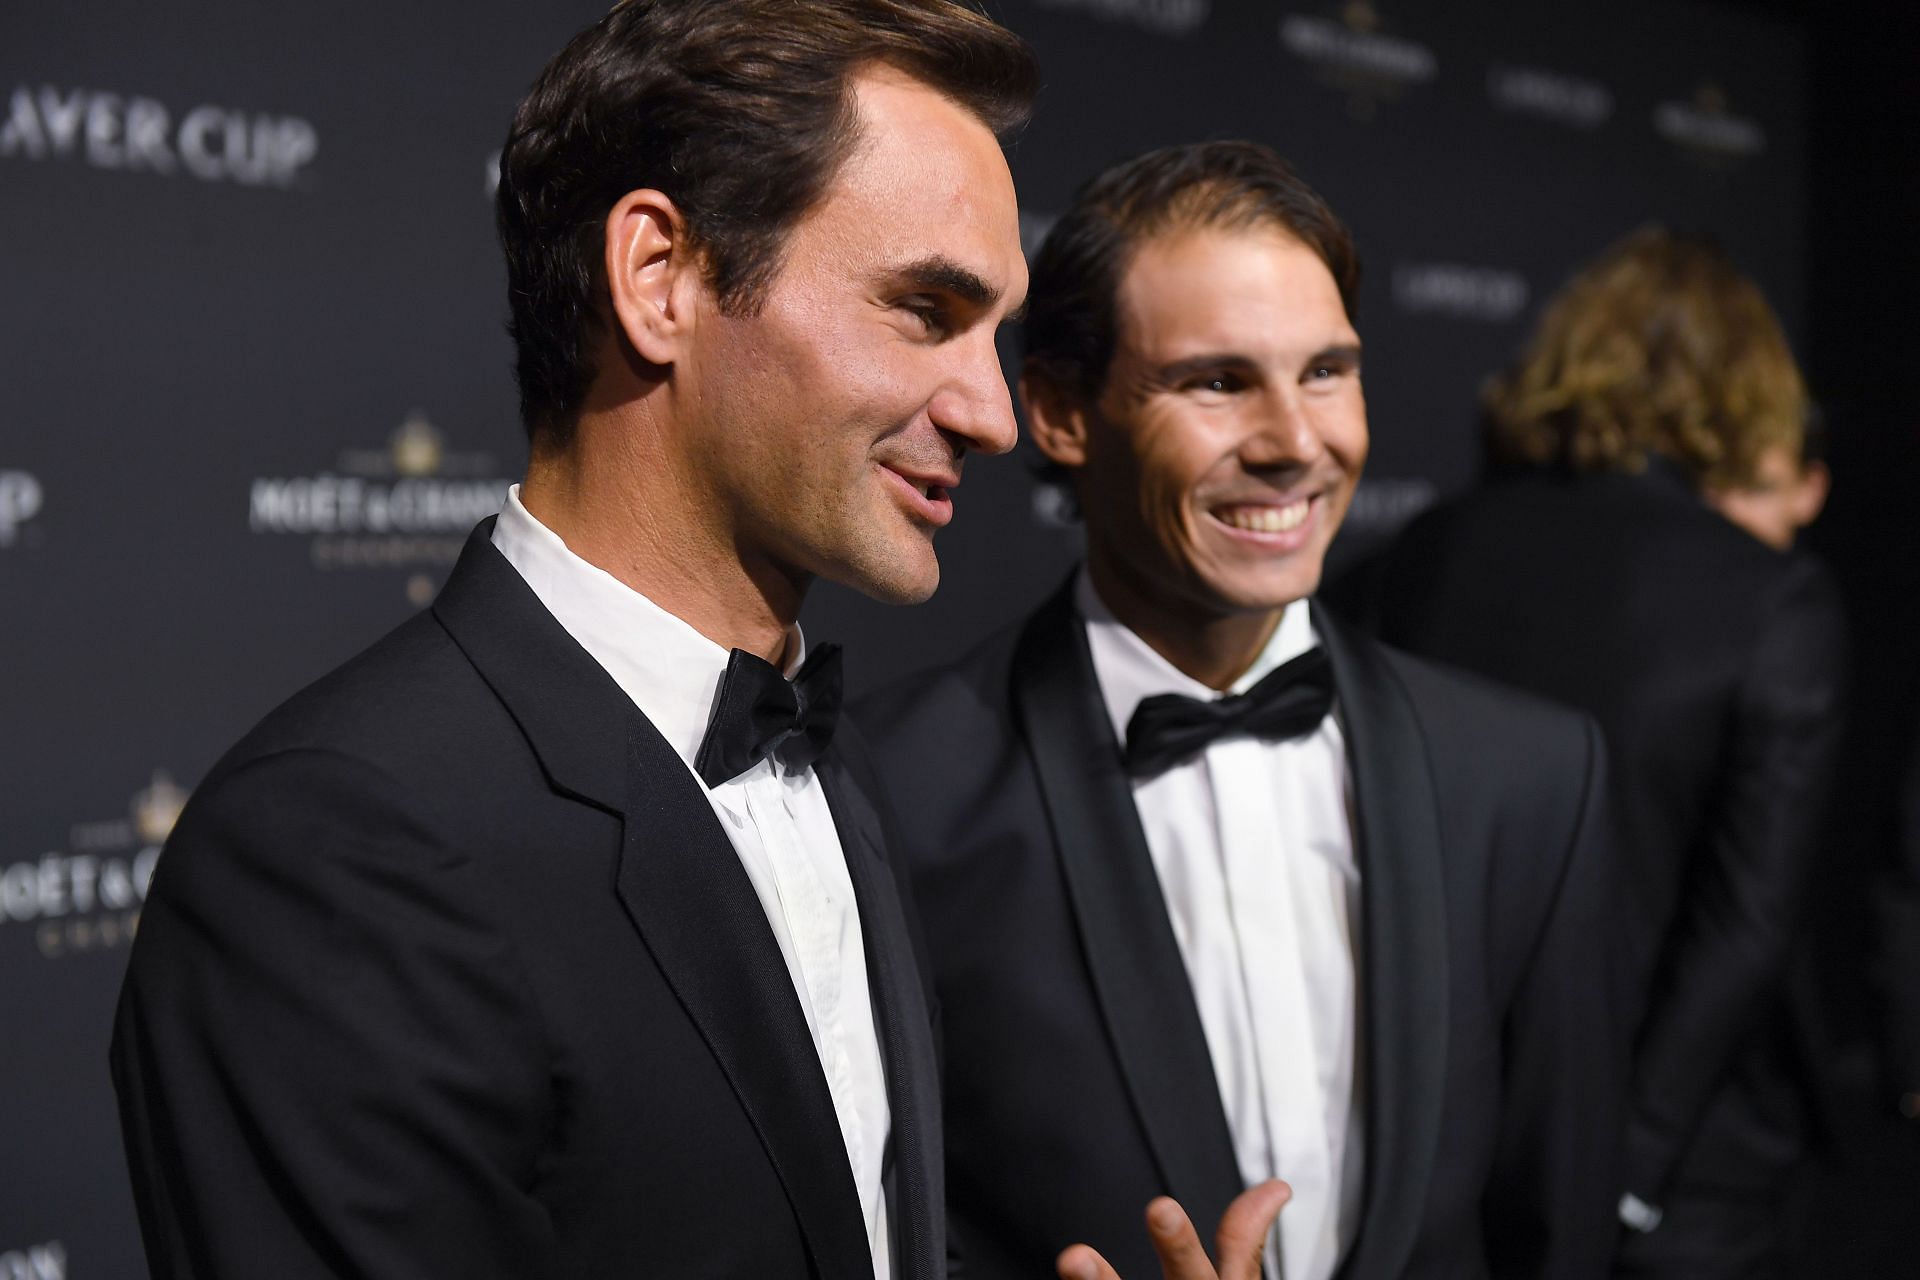 Roger Federer and Rafael Nadal are rumored to play an exhibition match in Spain soon.